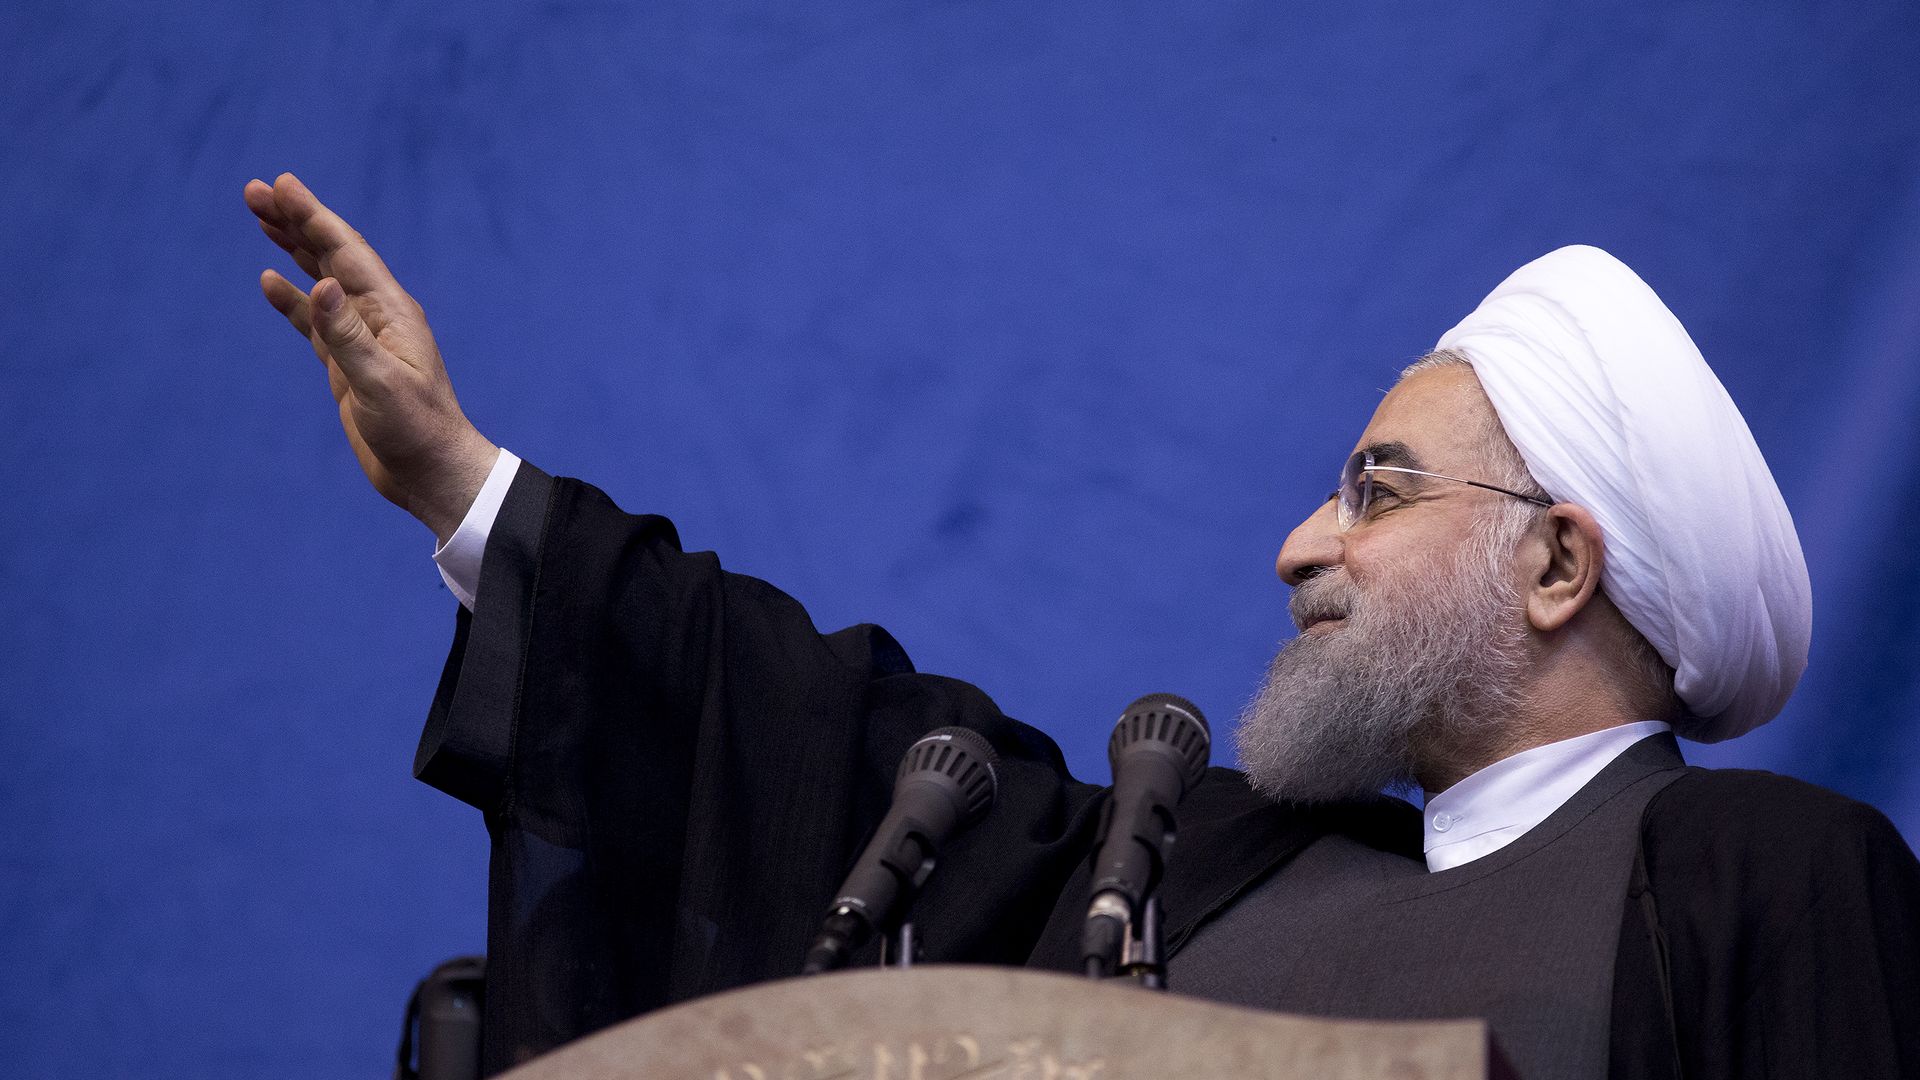 Hassan Rouhani waves his hand up before a blue background.